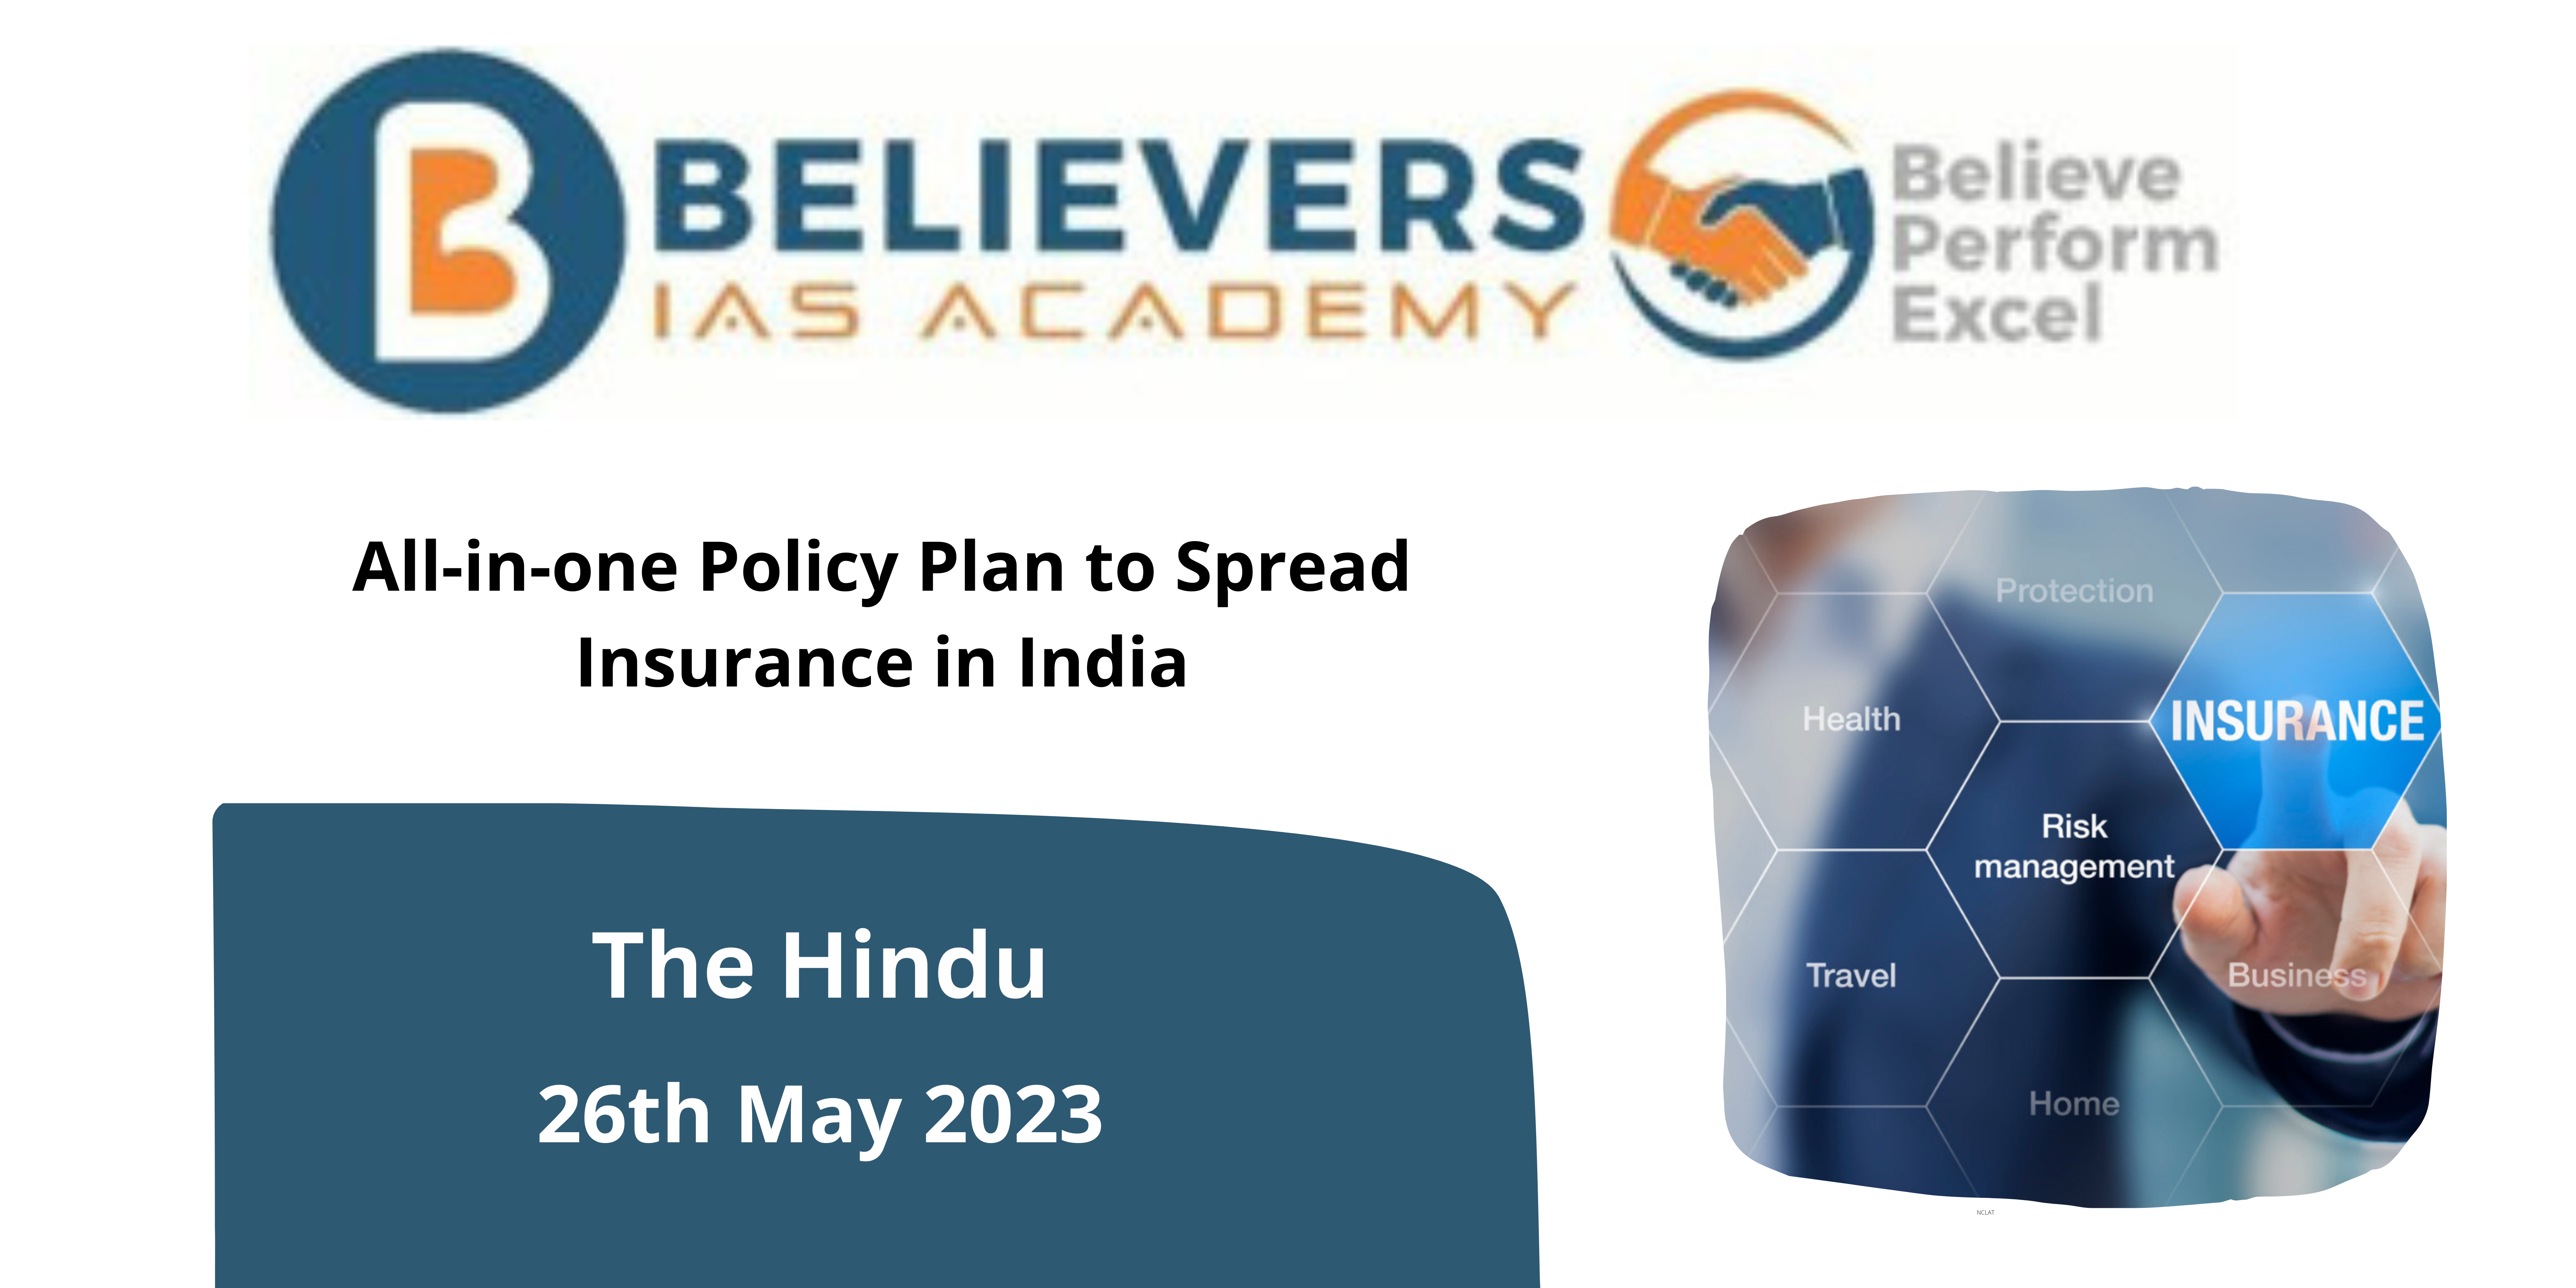 All-in-one Policy Plan to Spread Insurance in India